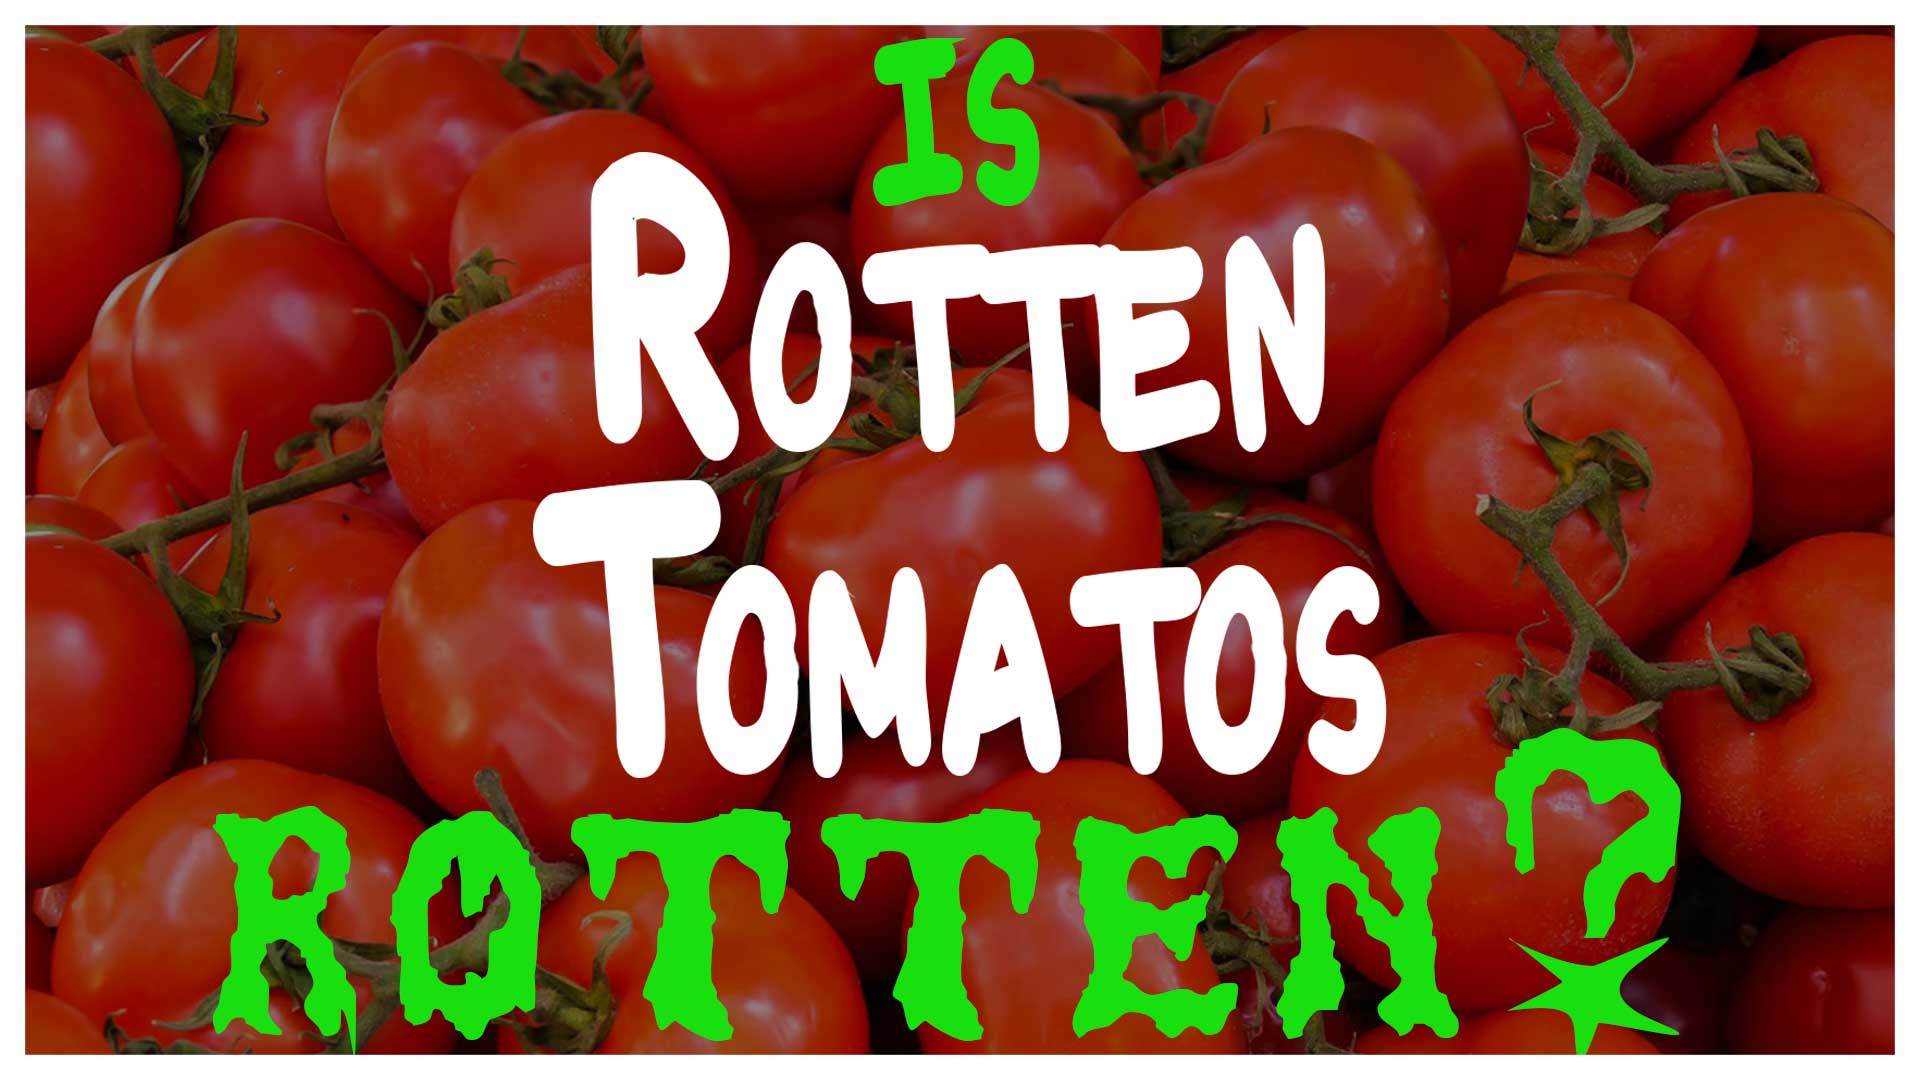 How Does Rotten Tomatoes Work?